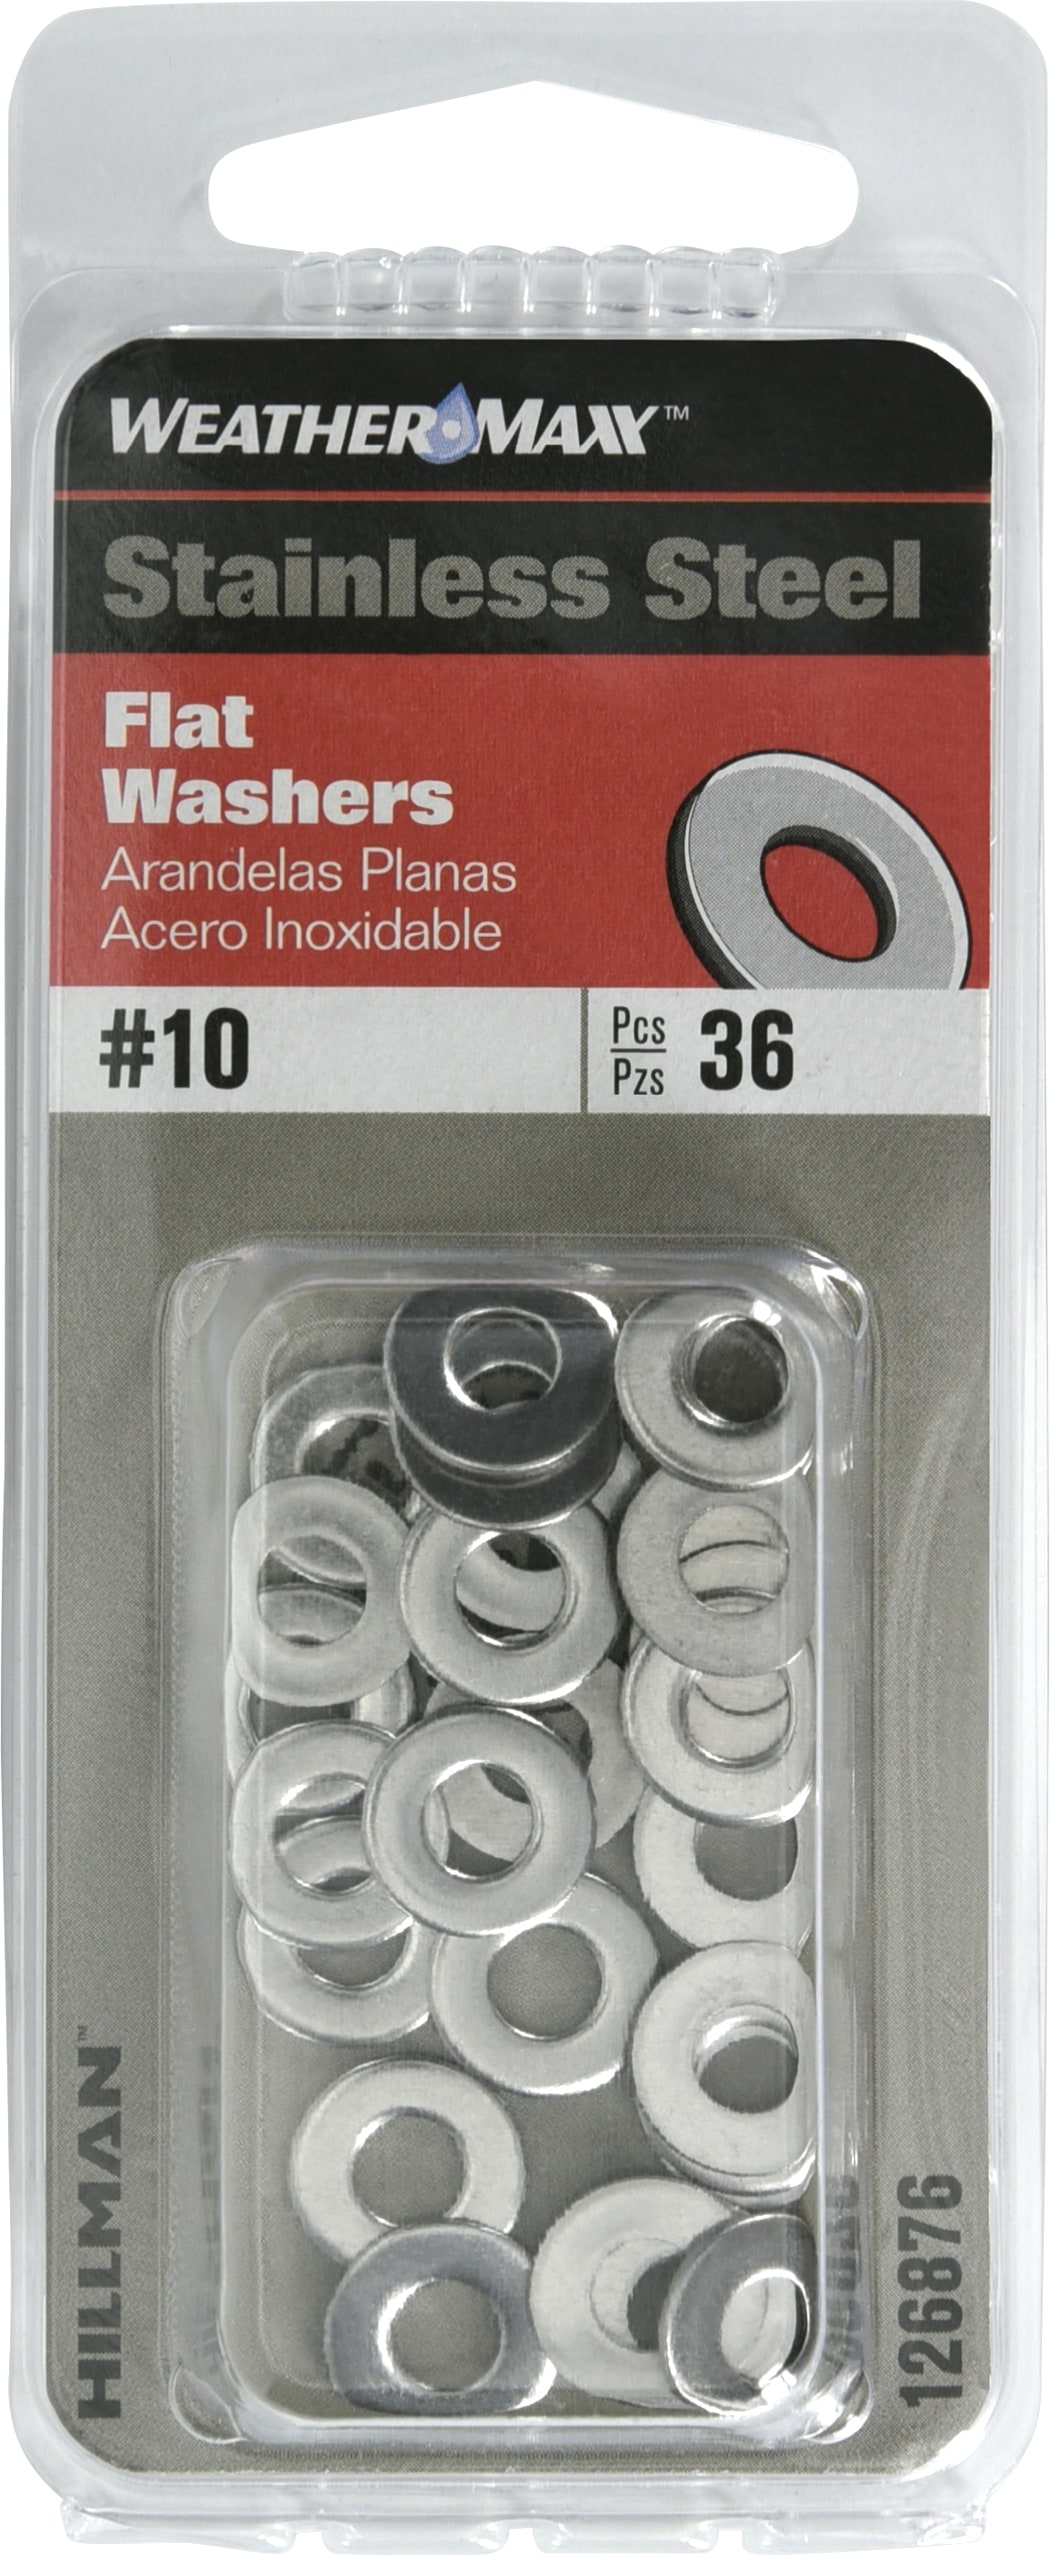 1/4 inch stainless steel flat washers packet of 10 